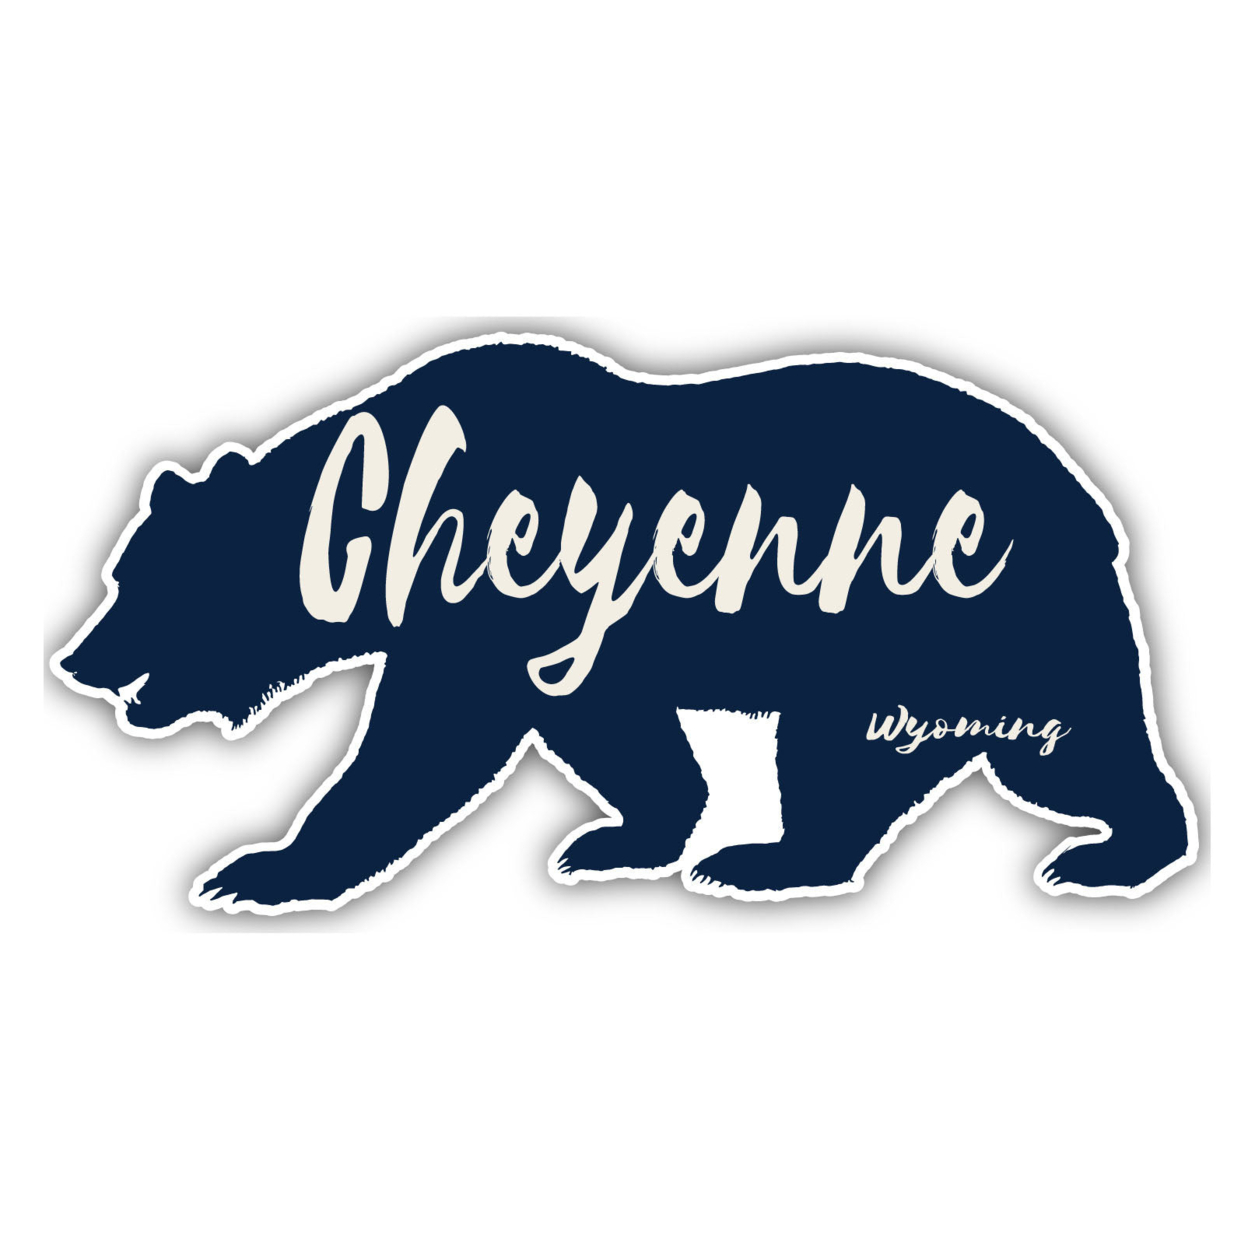 Cheyenne Wyoming Souvenir Decorative Stickers (Choose Theme And Size) - Single Unit, 2-Inch, Camp Life